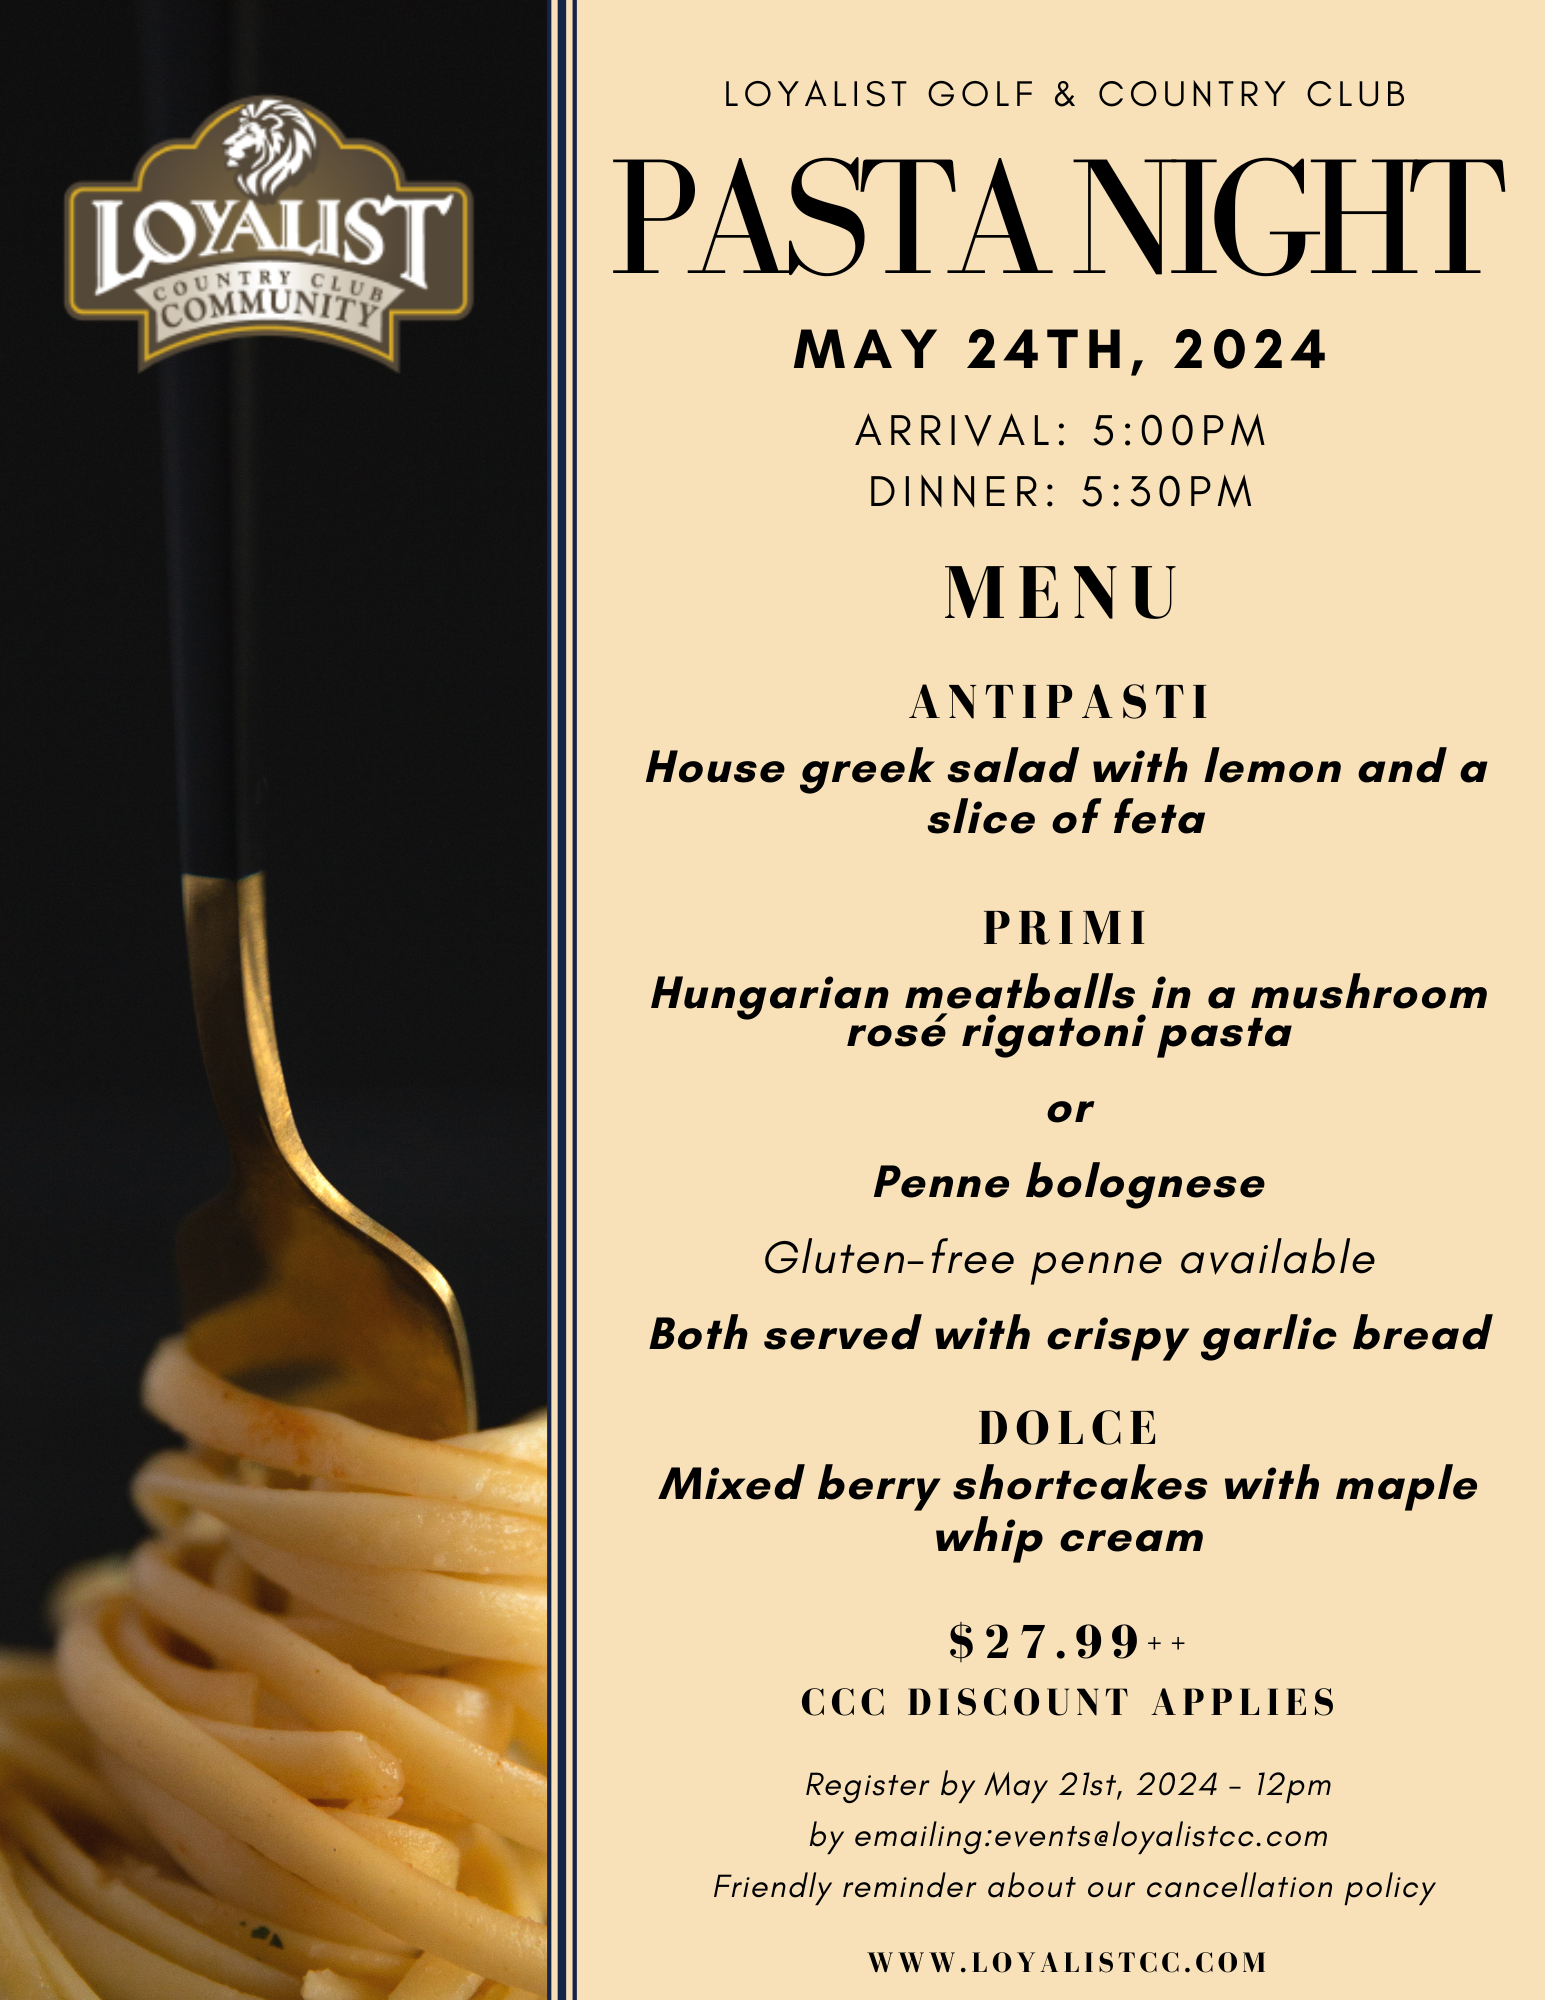 Loyalist Country Club is hosting a Pasta Night on May 24th